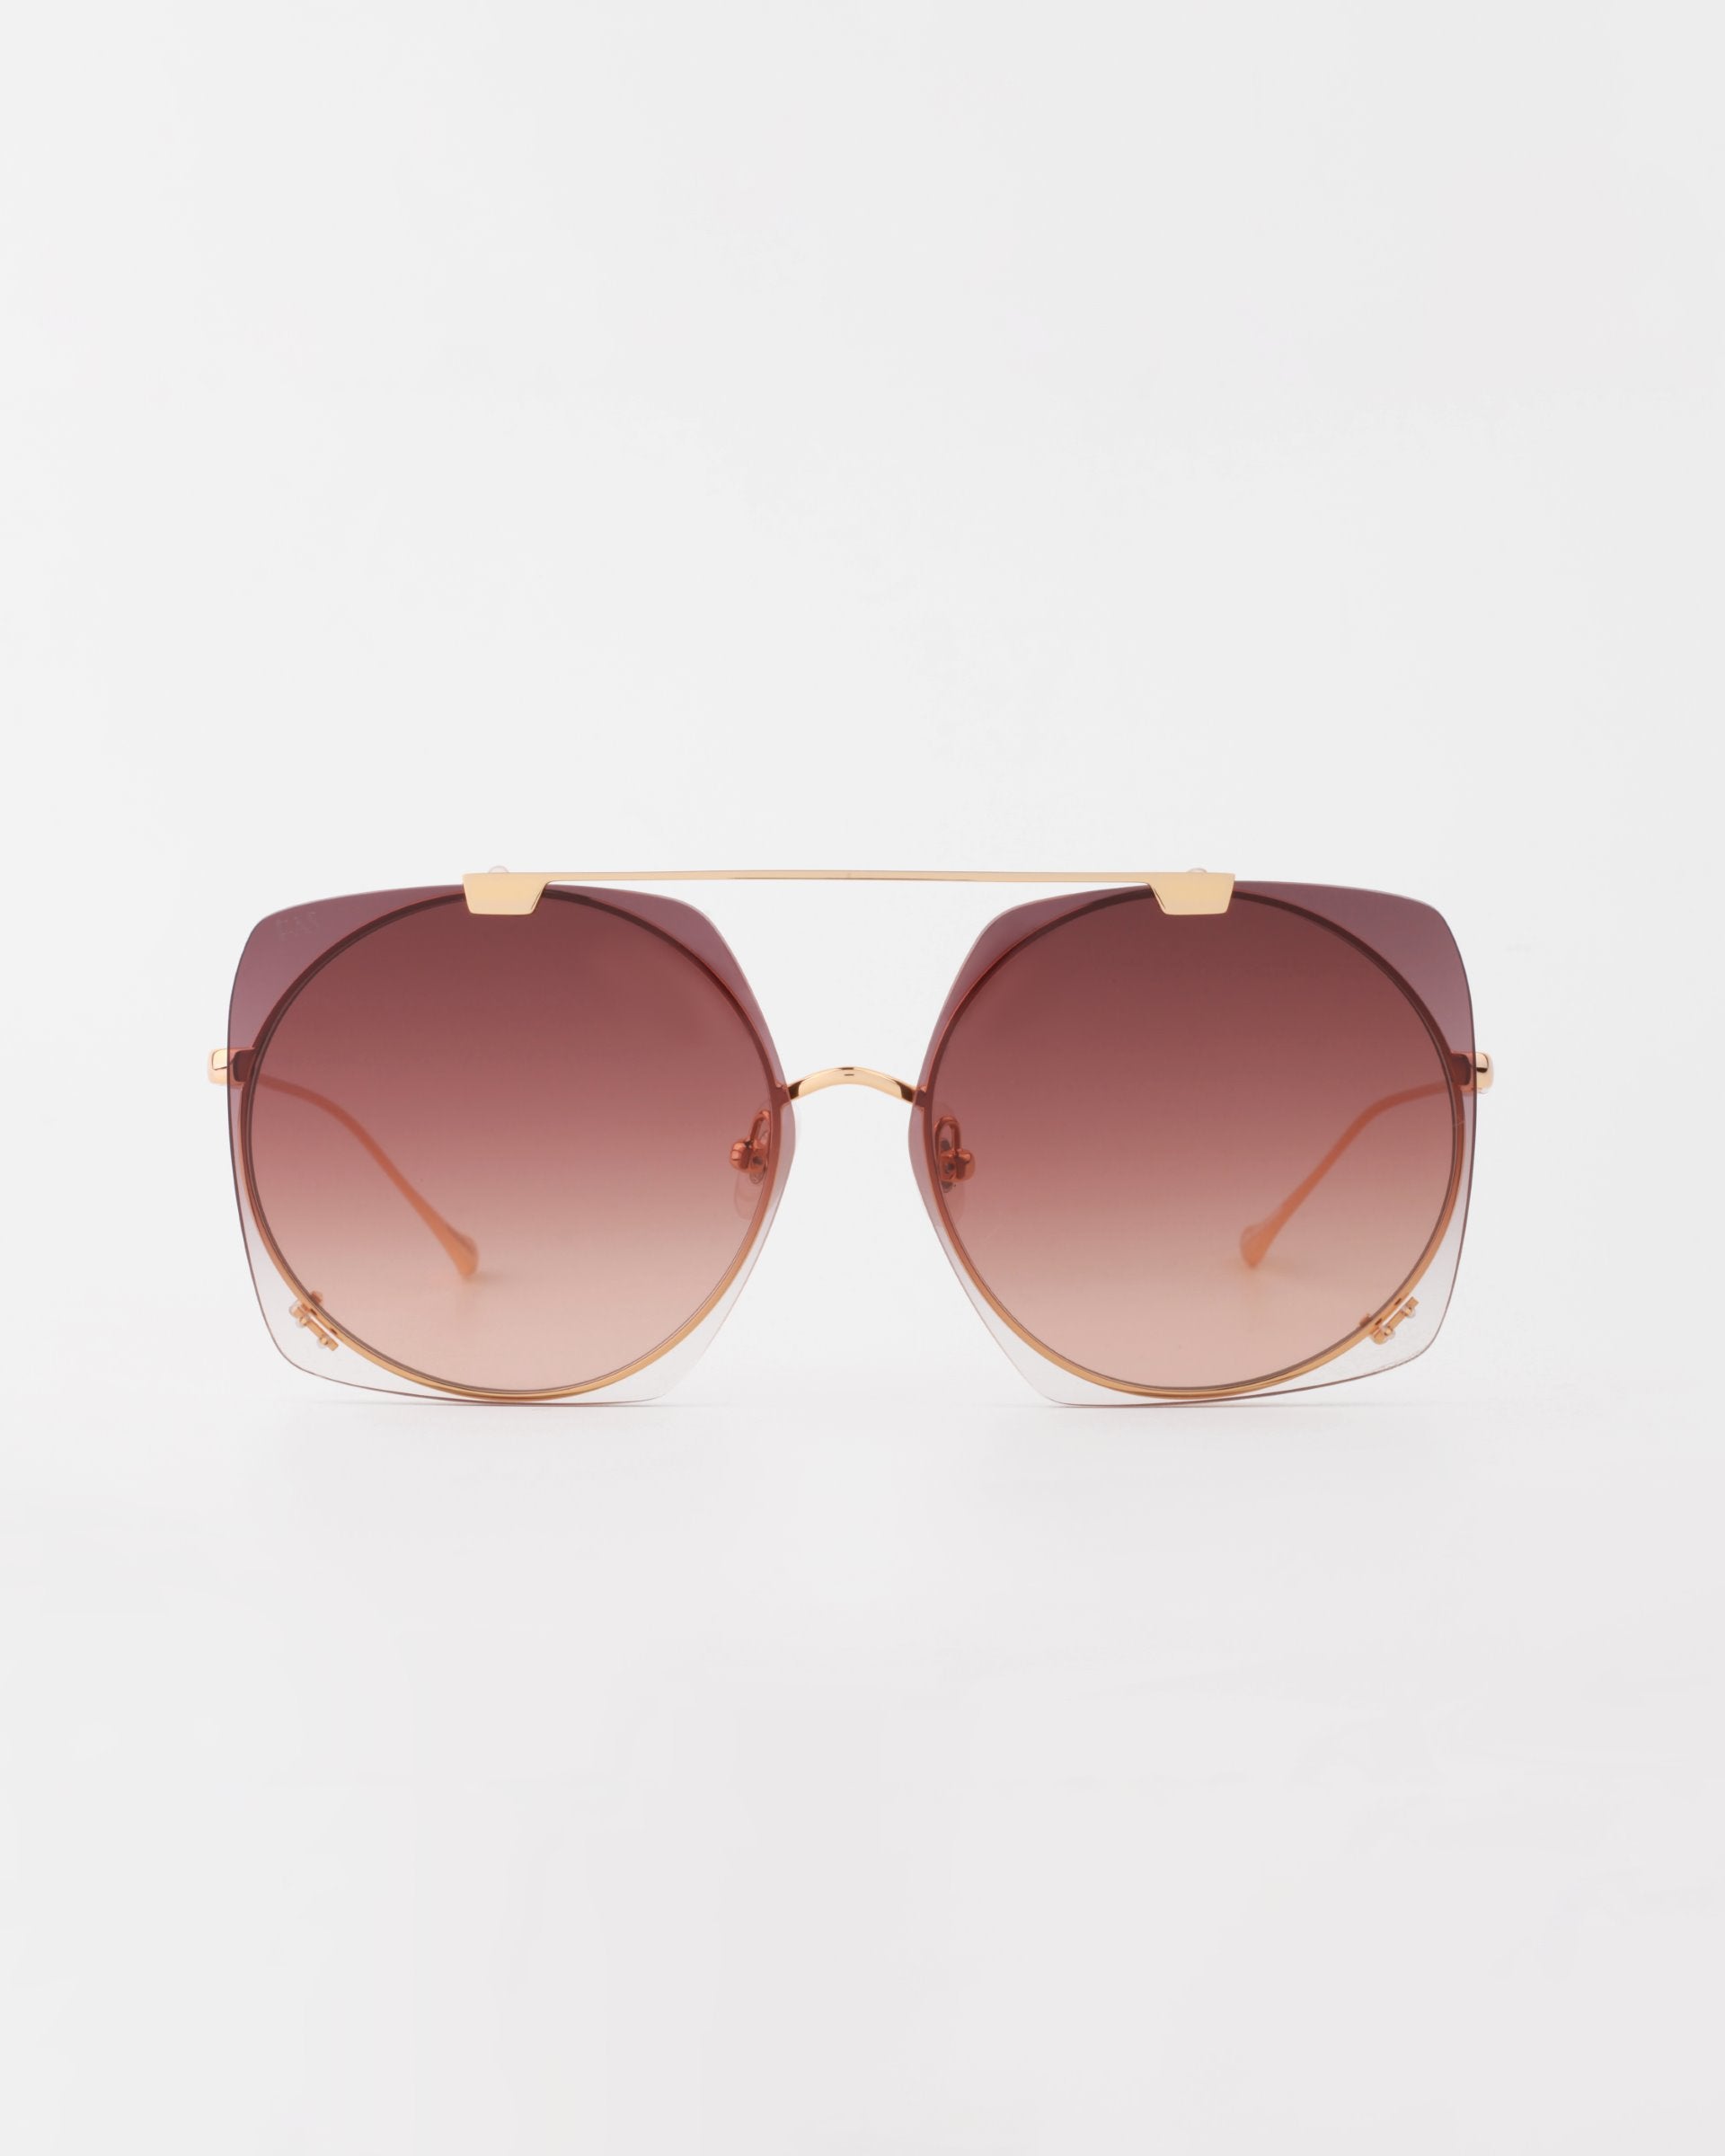 A pair of stylish sunglasses with oversized, round gradient lenses that transition from dark burgundy at the top to lighter at the bottom. The 18-karat gold-plated metal frame includes a thin bar across the top connecting the two sides, and the UVA &amp; UVB-protected lenses are slightly angular. For Art&#39;s Sake® Last Summer.